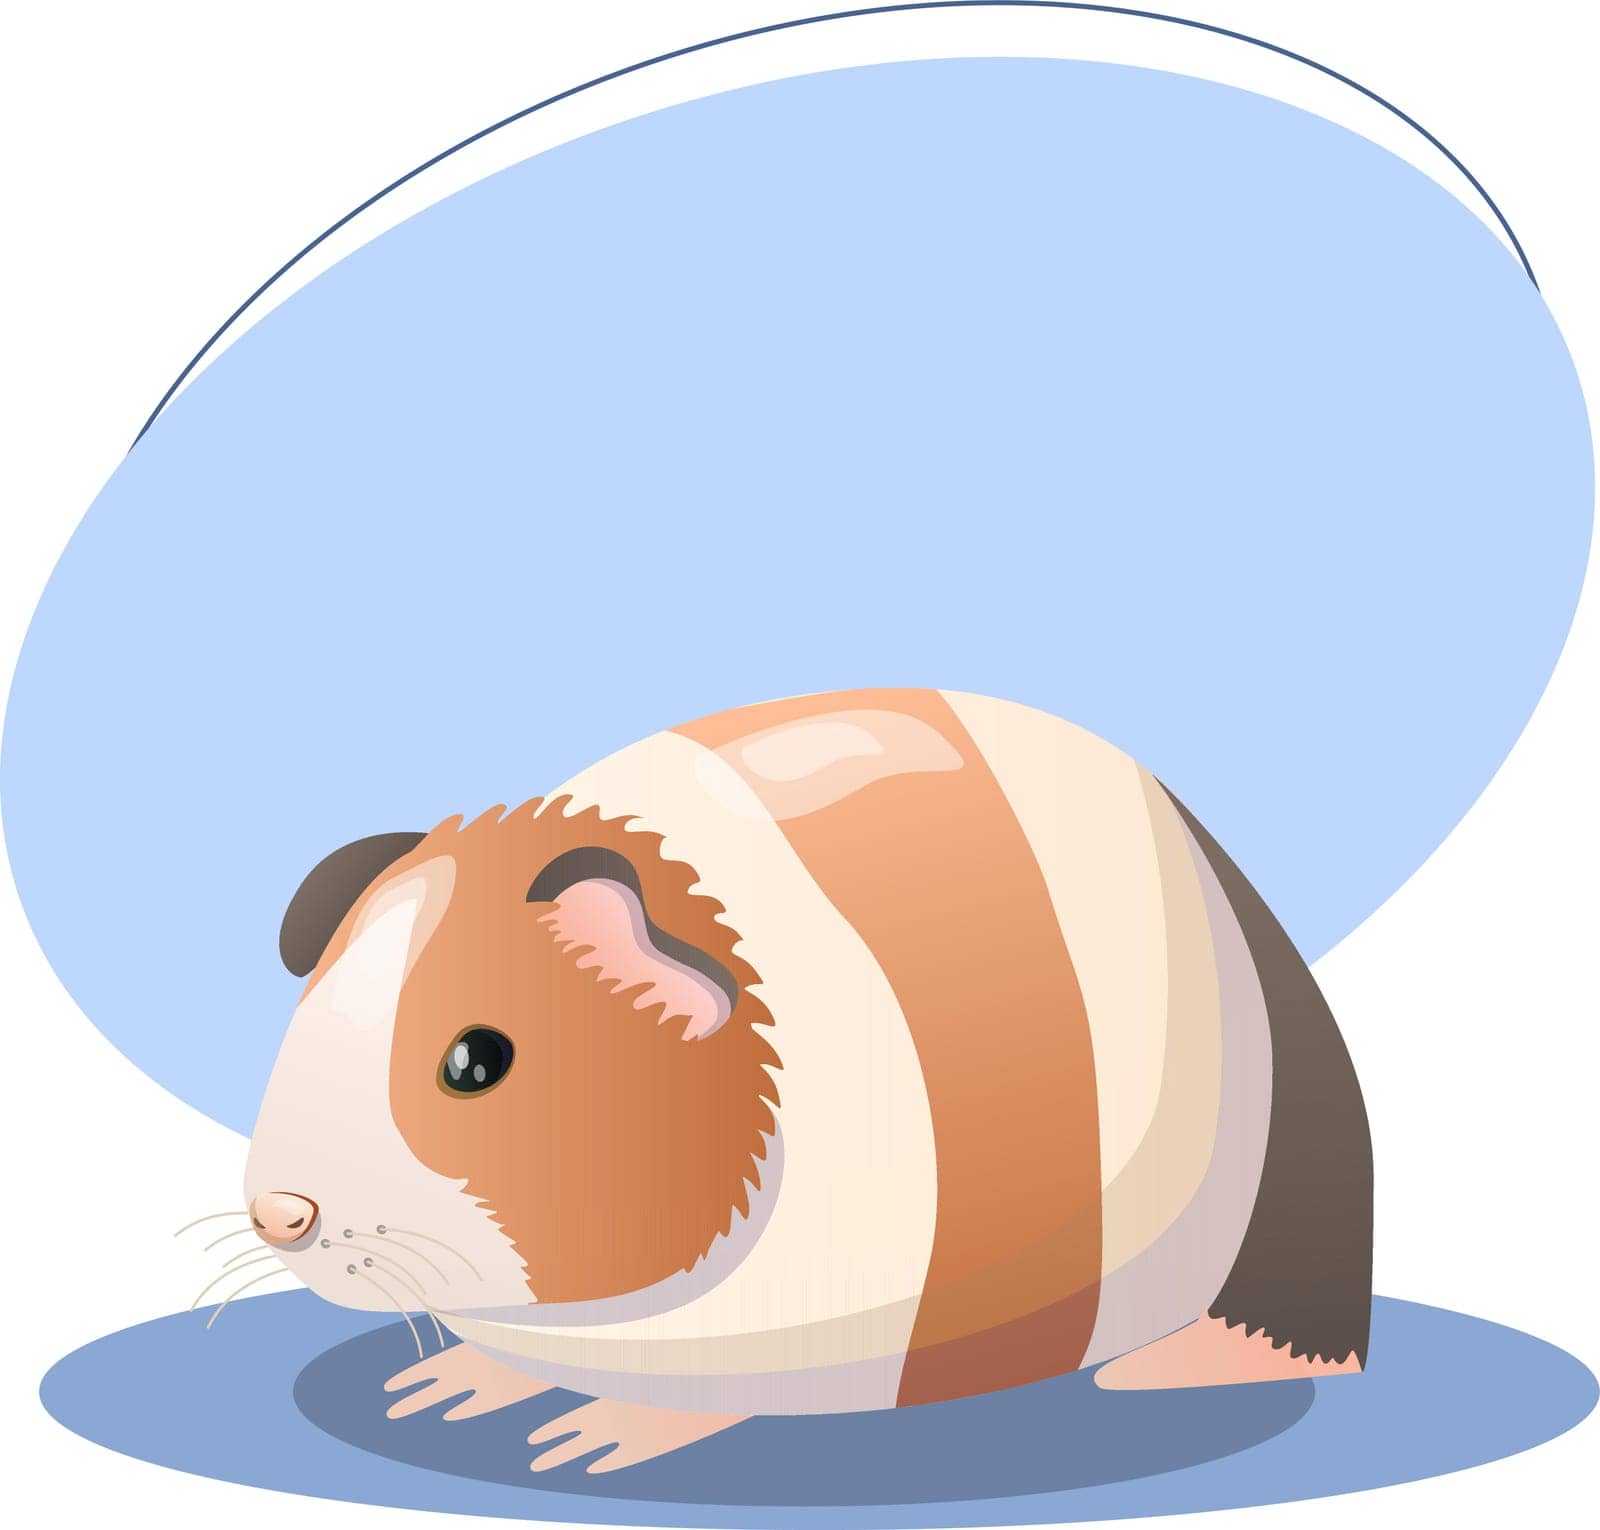 Guinea pig illustration. Animal, ears, paws, fluffy, colorful. Vector graphics.